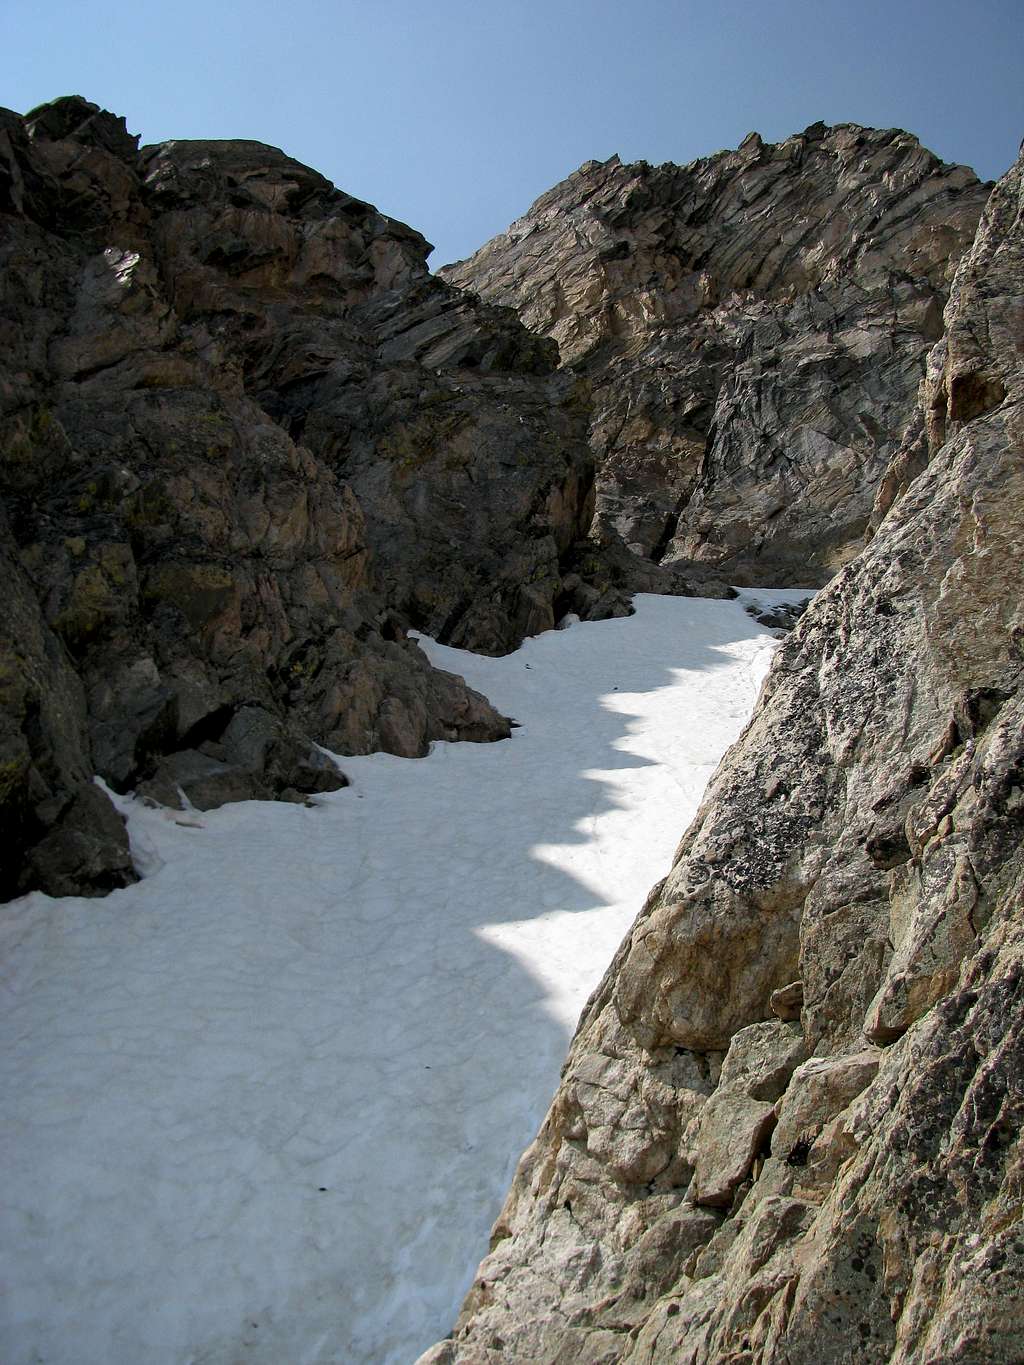 Looking up the colouir (lower part)